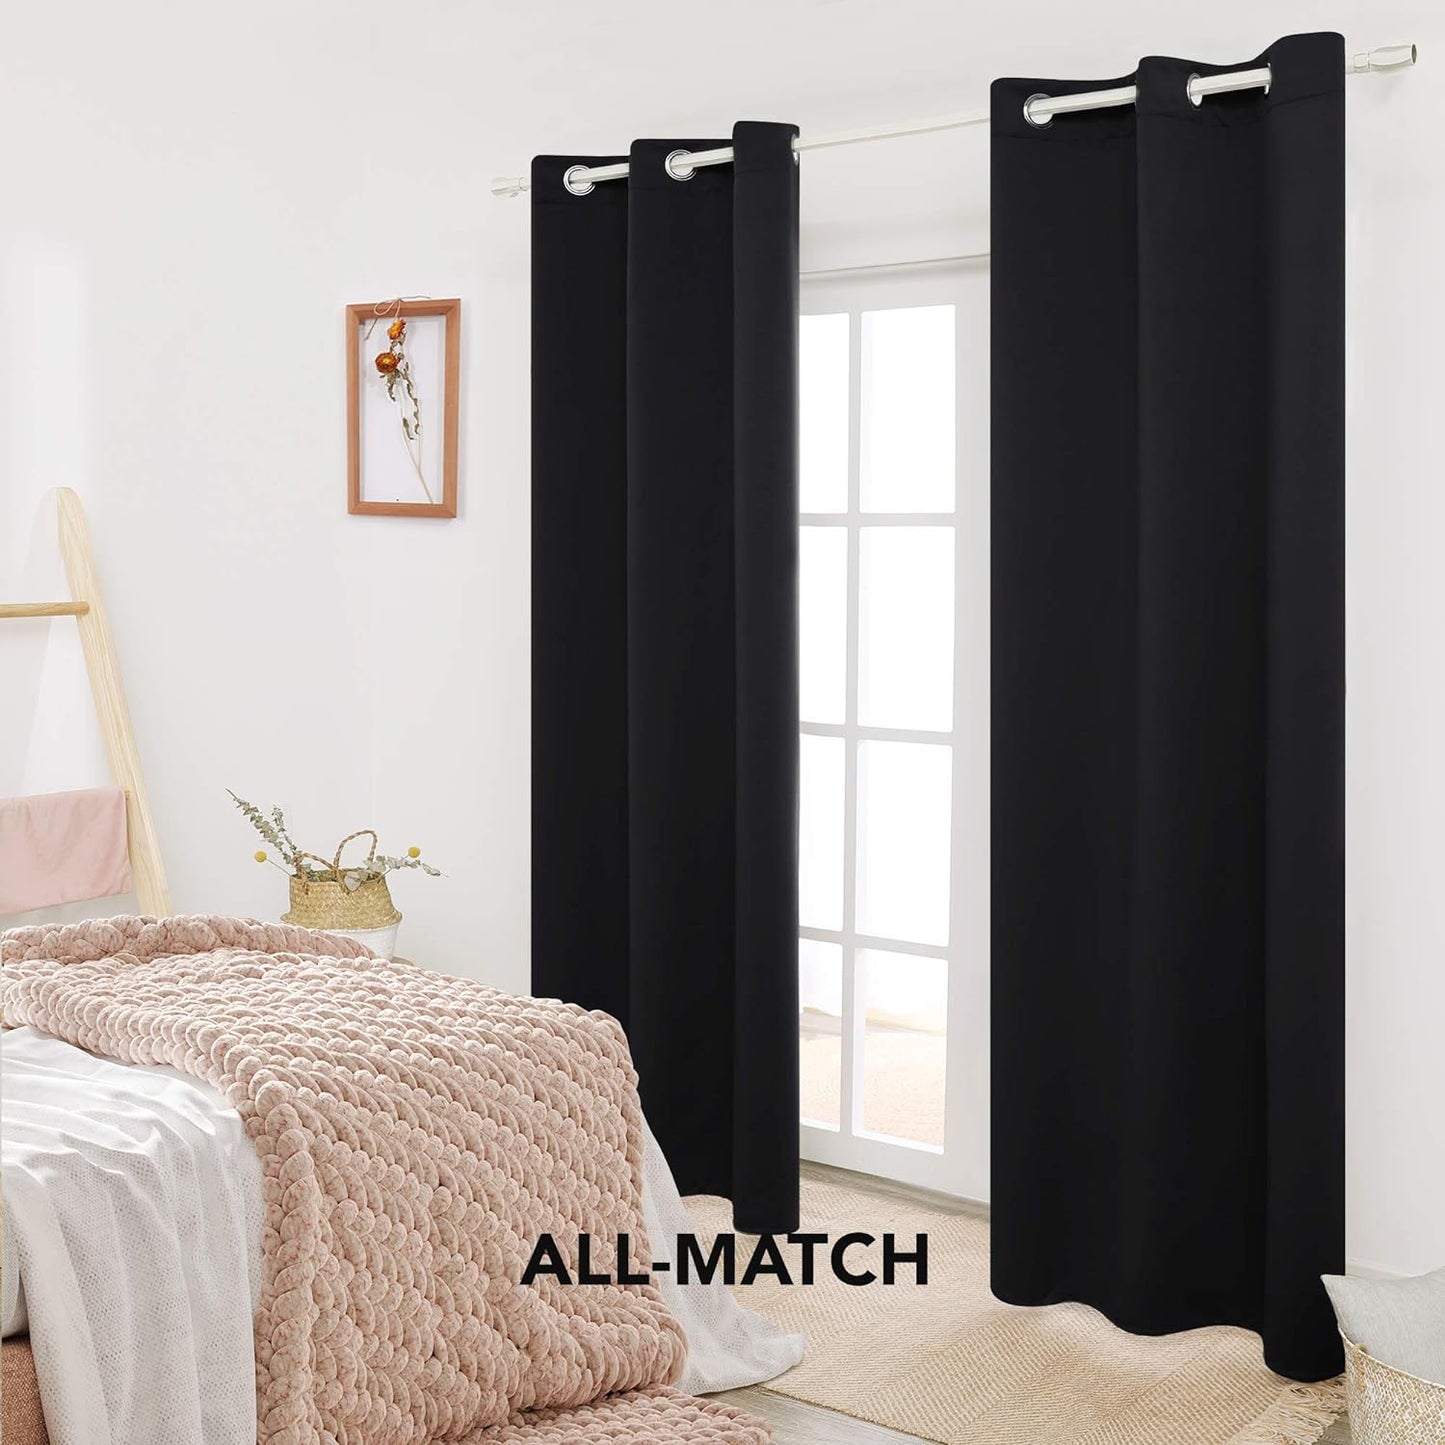 Deconovo 100% Blackout Curtains Room Darkening Thermal Insulated Blackout Grommet Window Curtain for Living Room,Black,42X120-Inch,1 Panel  Deconovo   